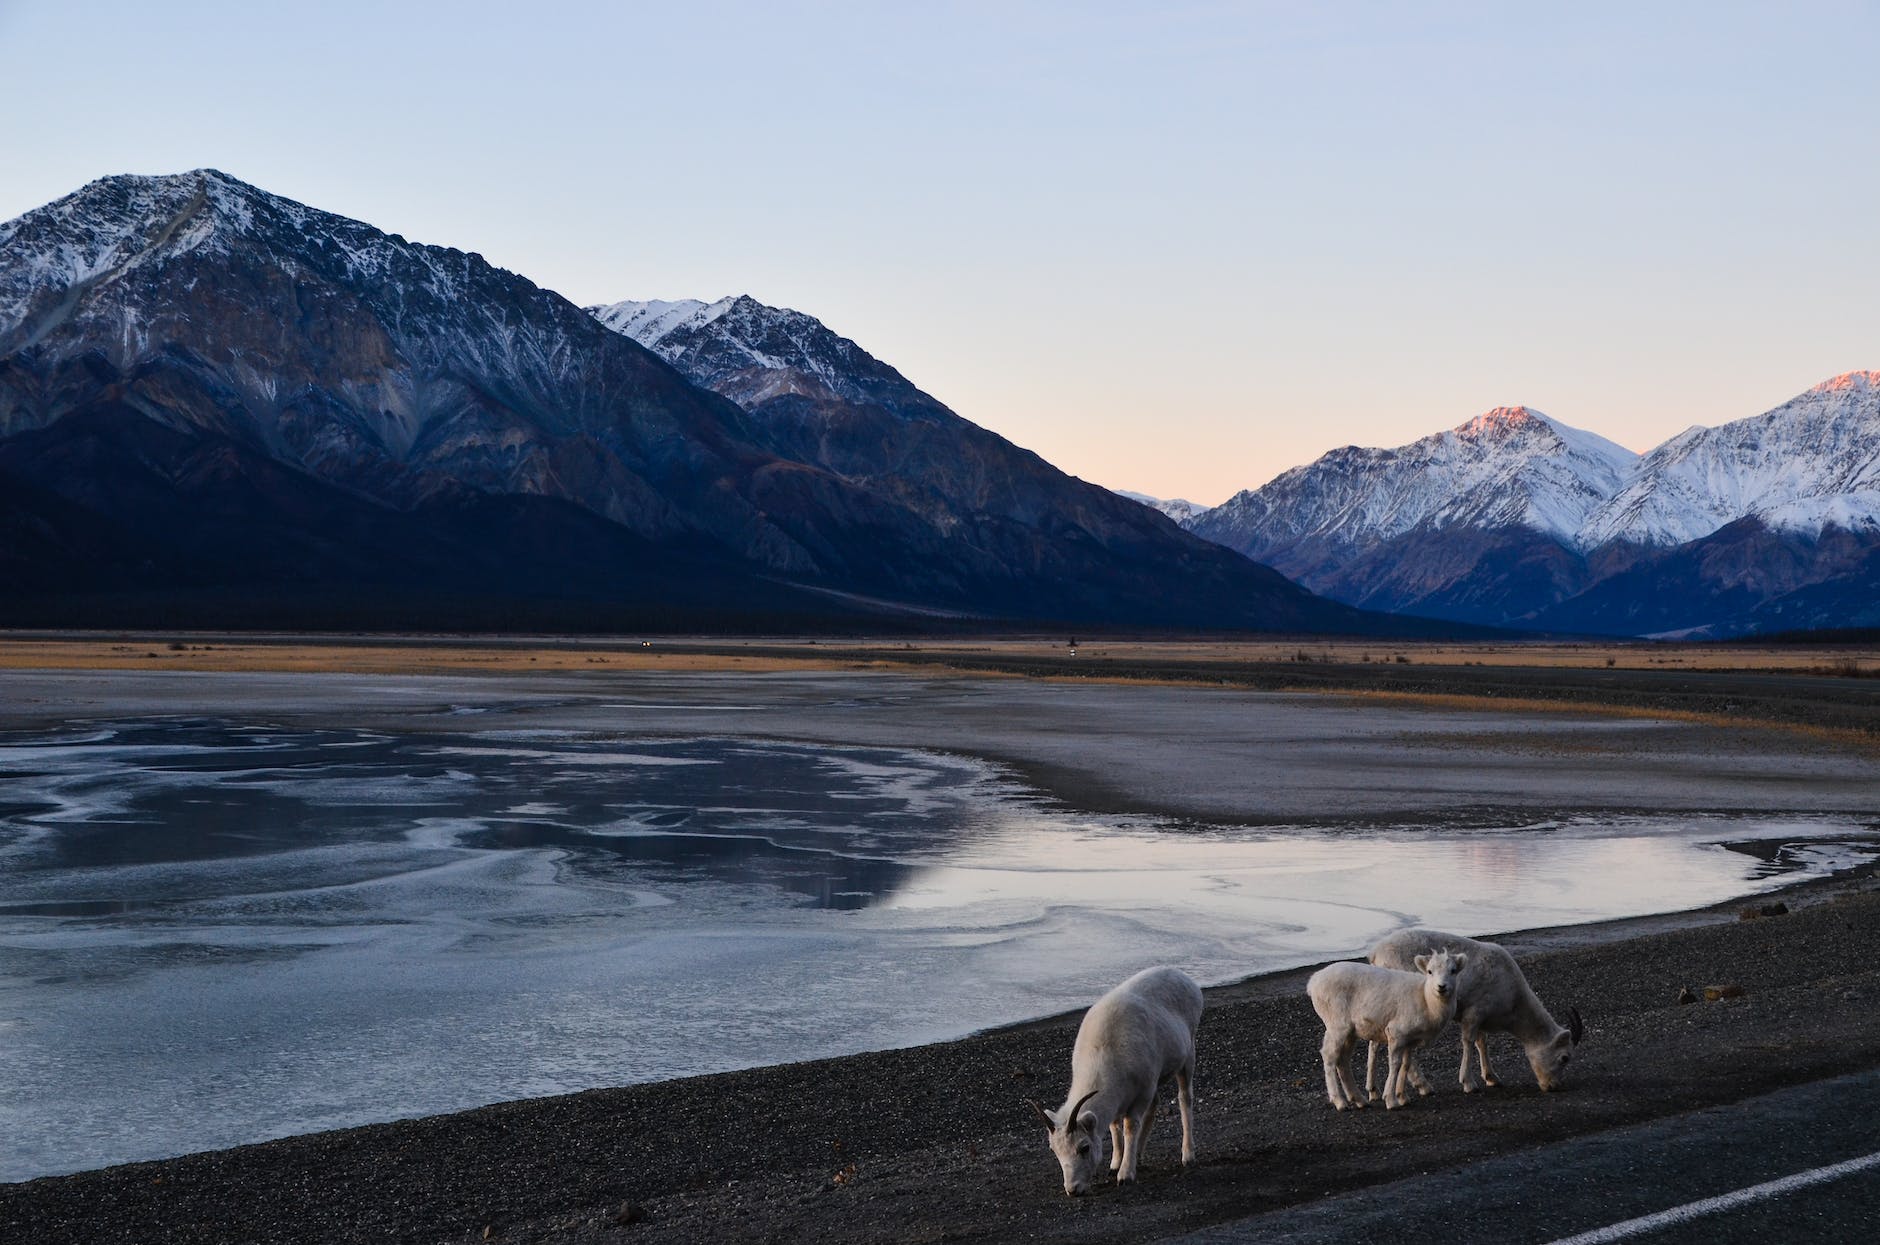 herd of sheep near the snow capped mountains